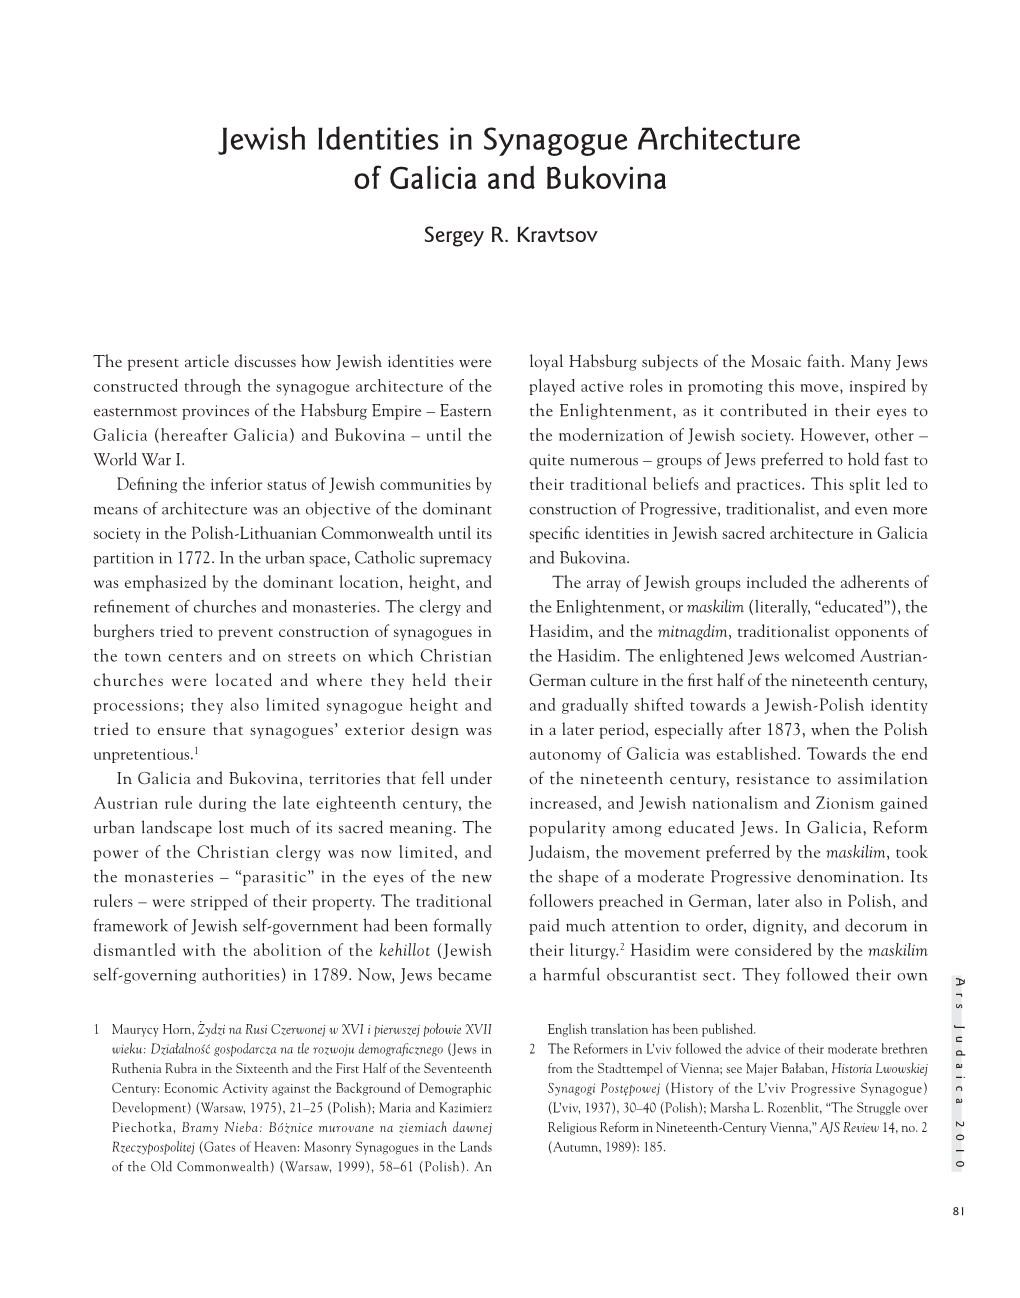 Jewish Identities in Synagogue Architecture of Galicia and Bukovina